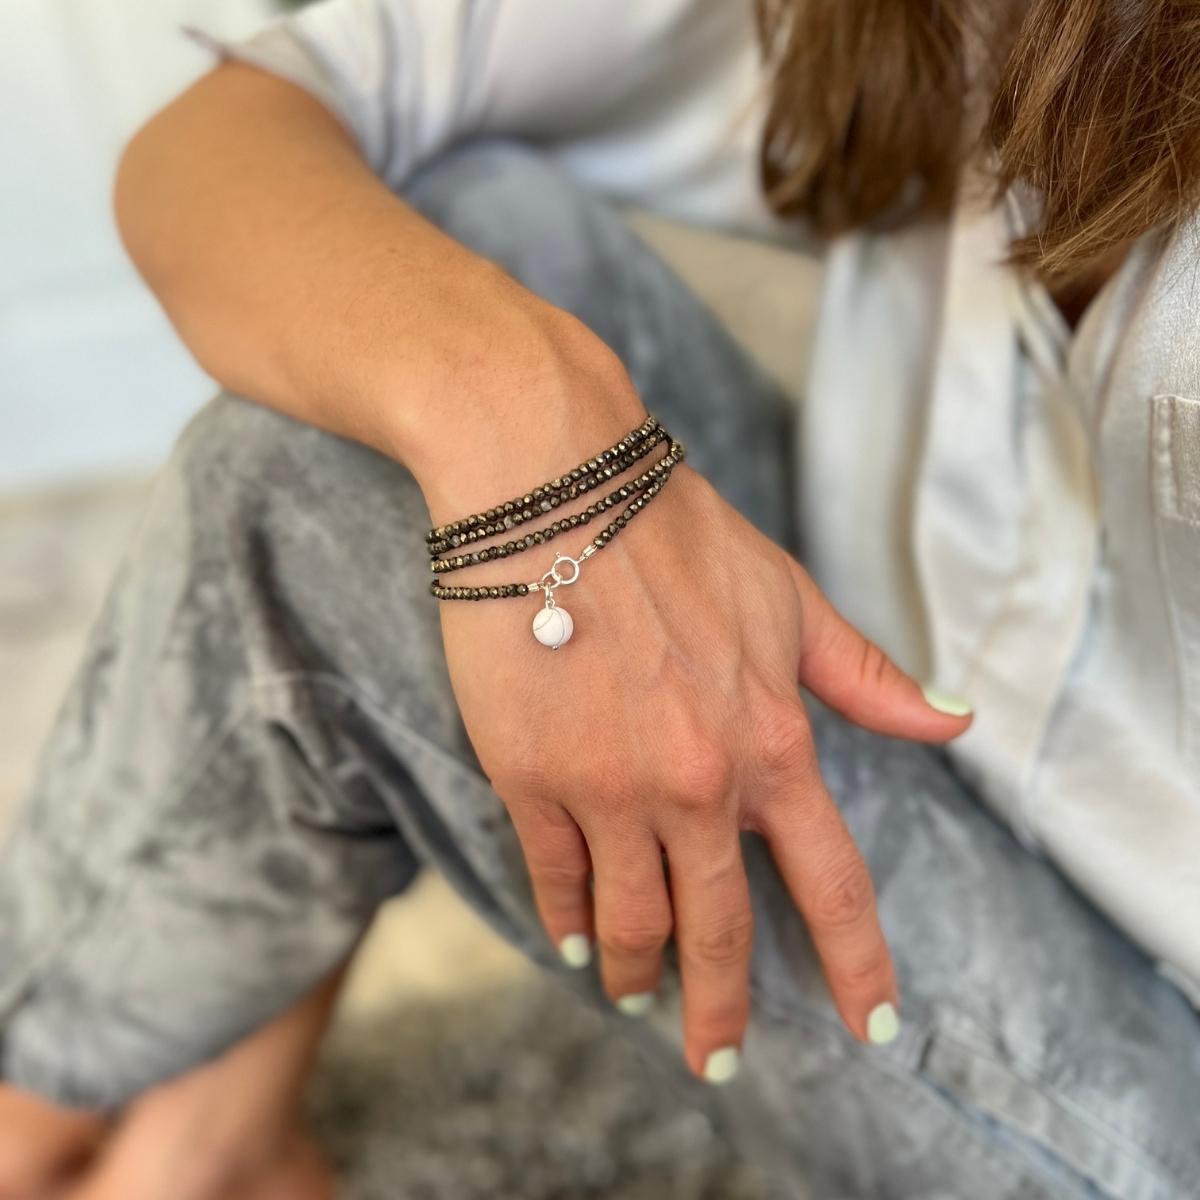 Attract Abundance Wrap Bracelet with Pyrite. Pyrite is a potent stone when it comes to cultivating abundance and prosperity. Howlite strengthens memory and stimulates desire for knowledge. It teaches patience and helps to eliminate rage, pain and stress.